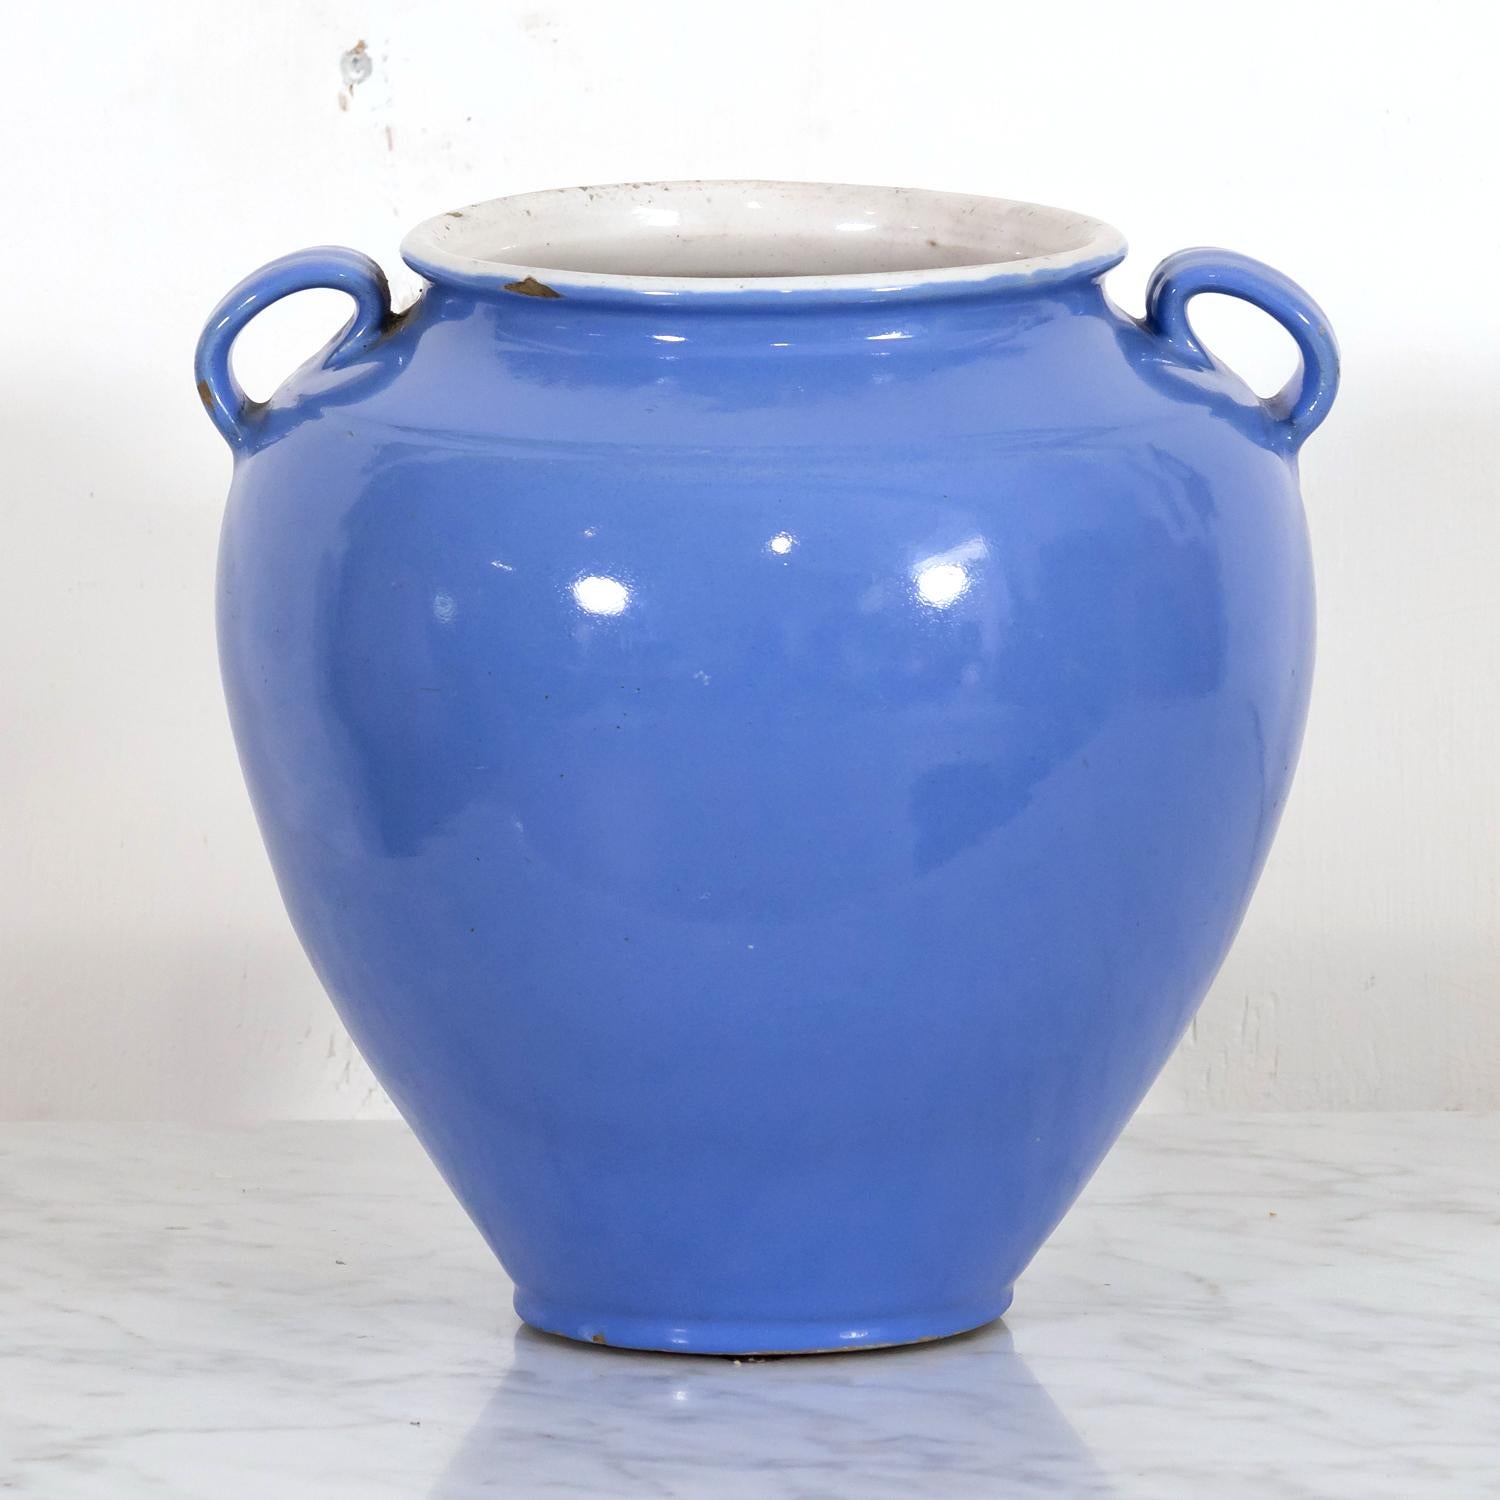 A 19th century French confit pot or egg pot with rare periwinkle blue exterior glaze and white interior glaze, circa 1890s, from Martres-Tolosone, a small village in southwest France near Toulouse, renowned for the pottery manufacturers called